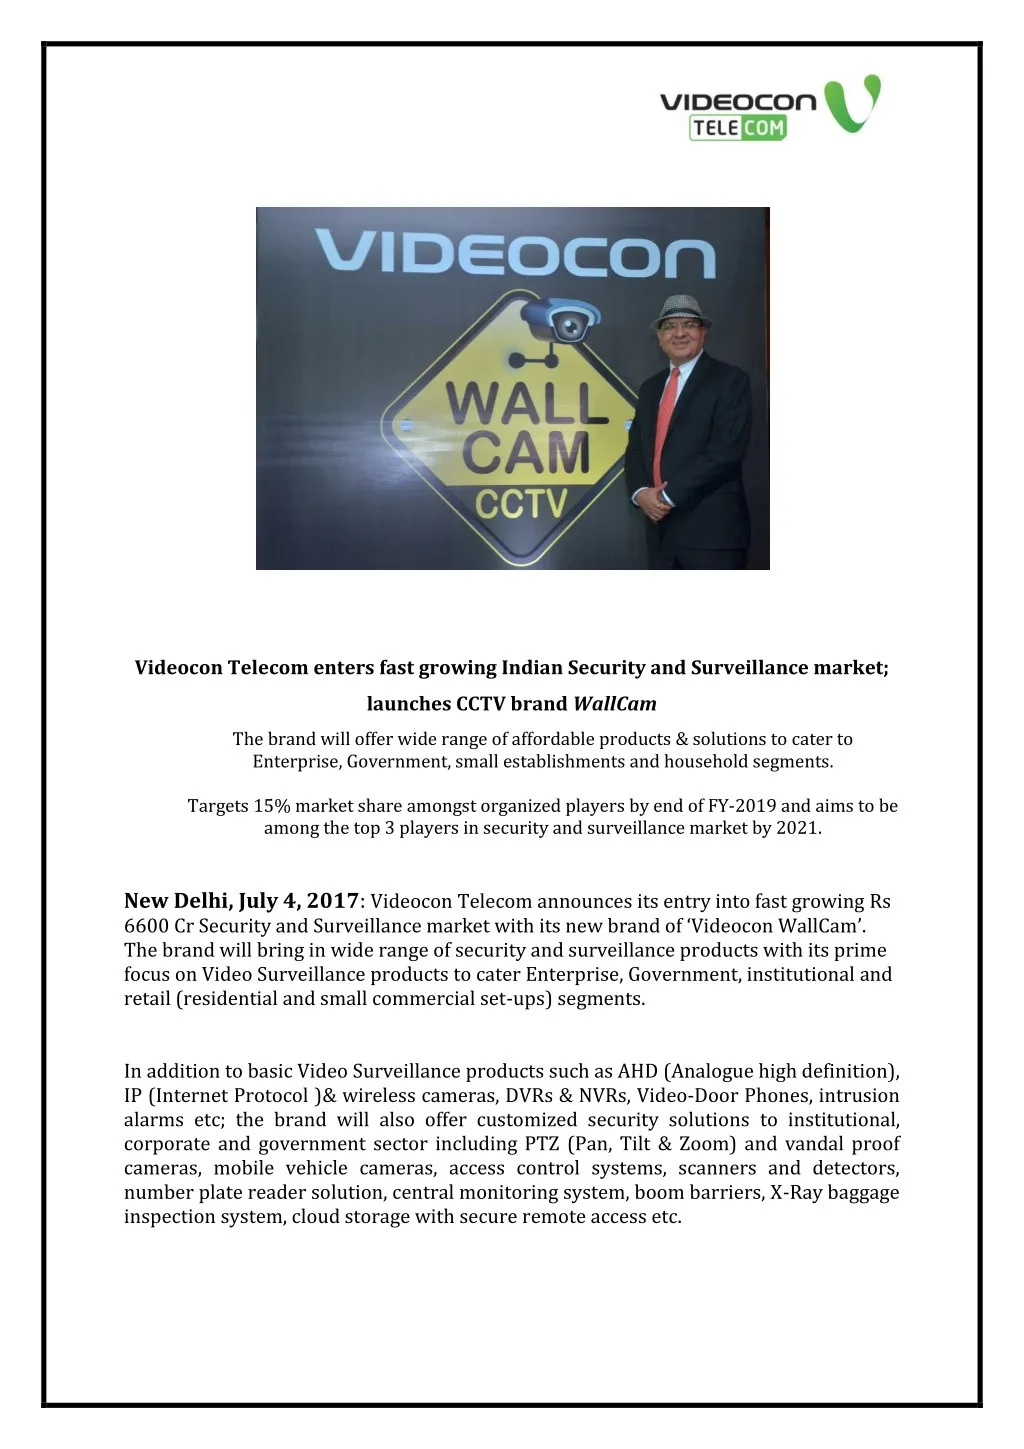 videocon telecom enters fast growing indian